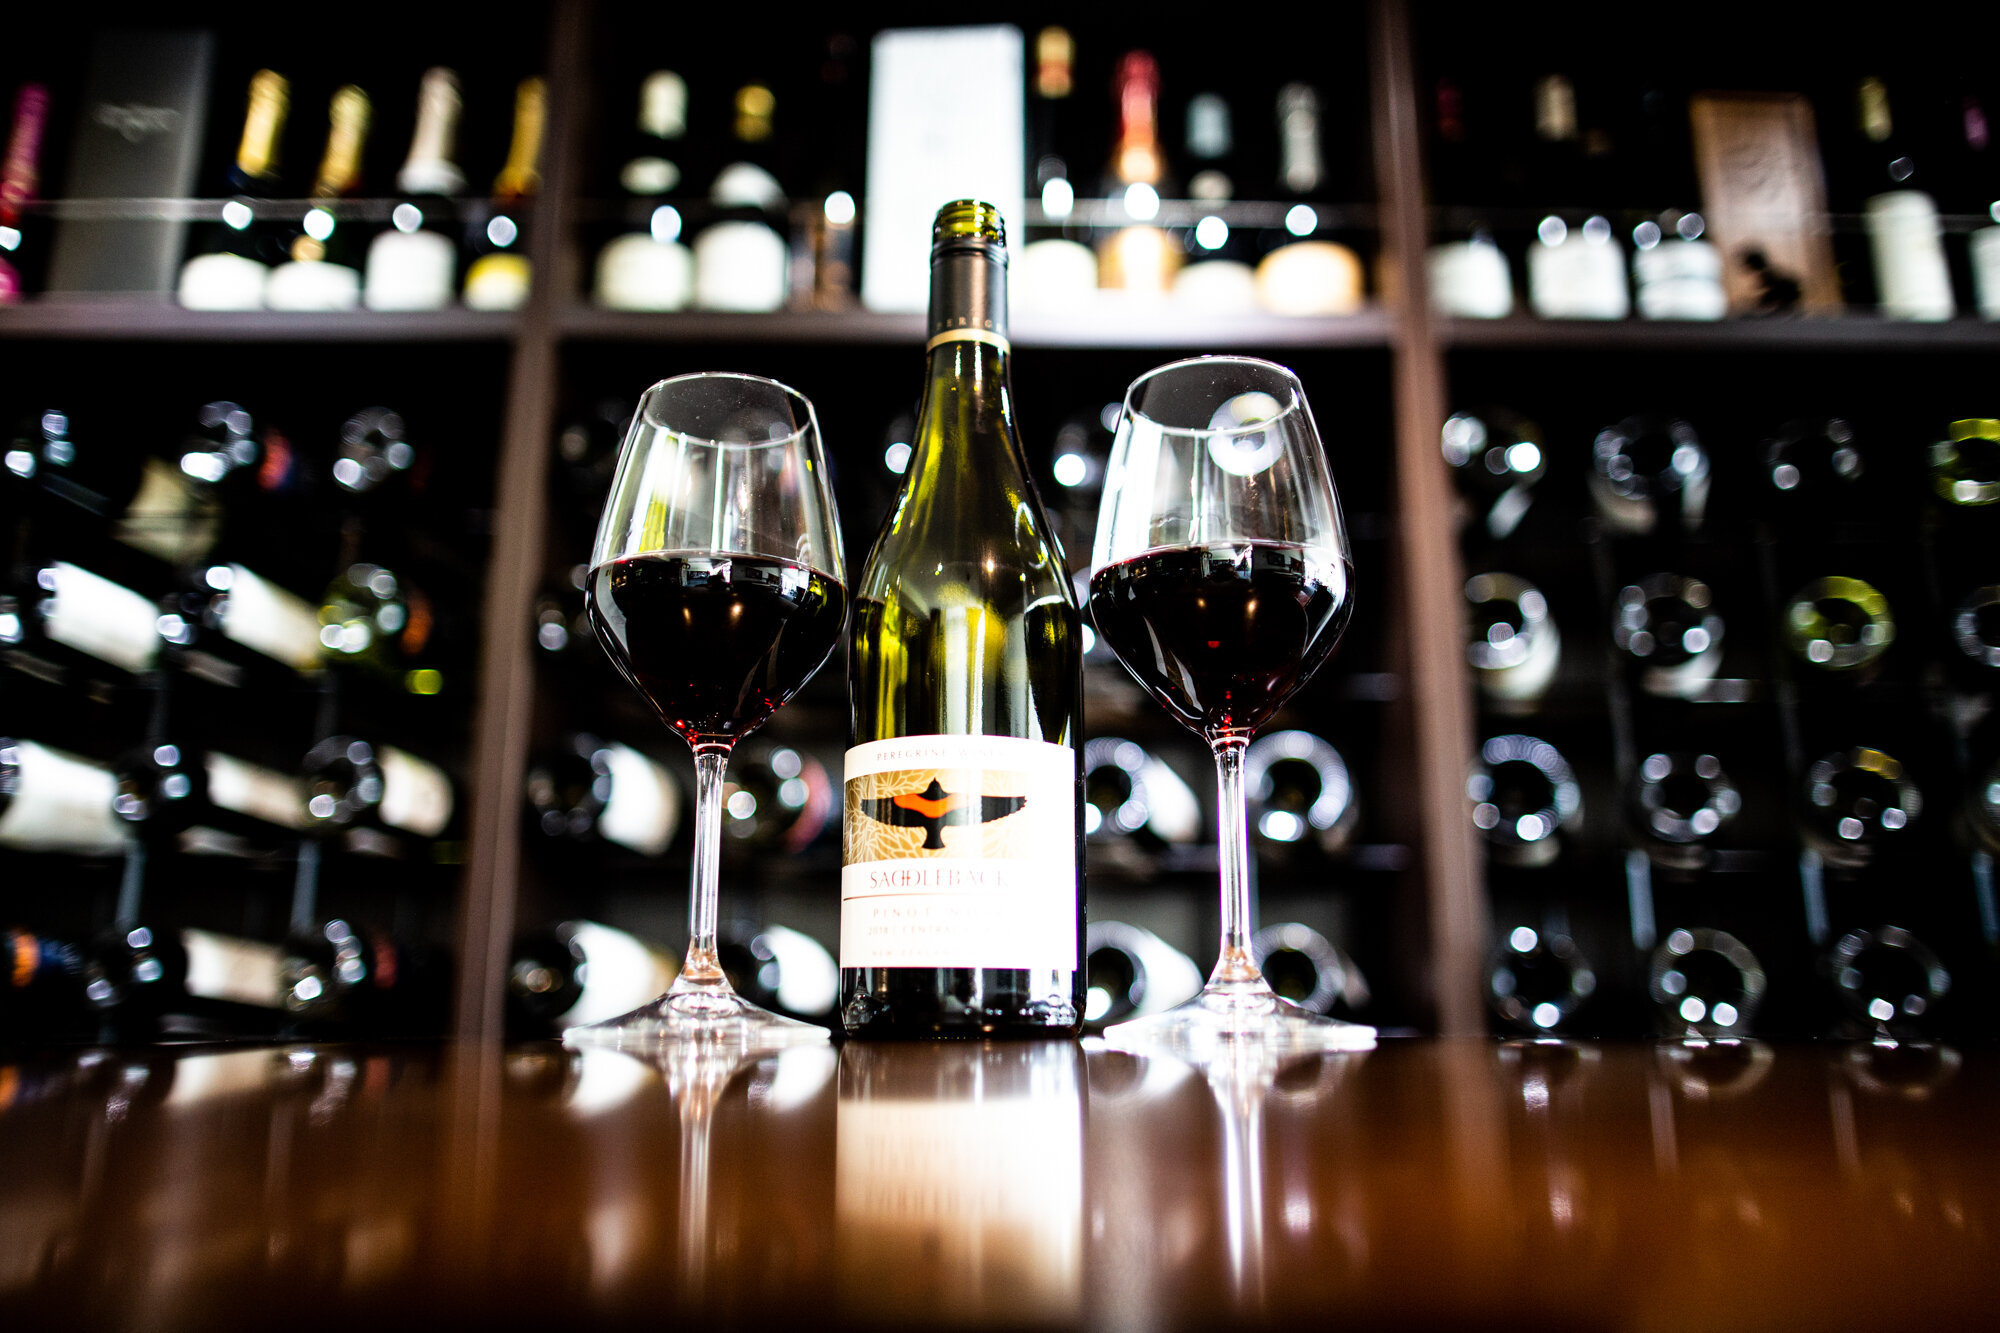 Enjoy our selection of wine